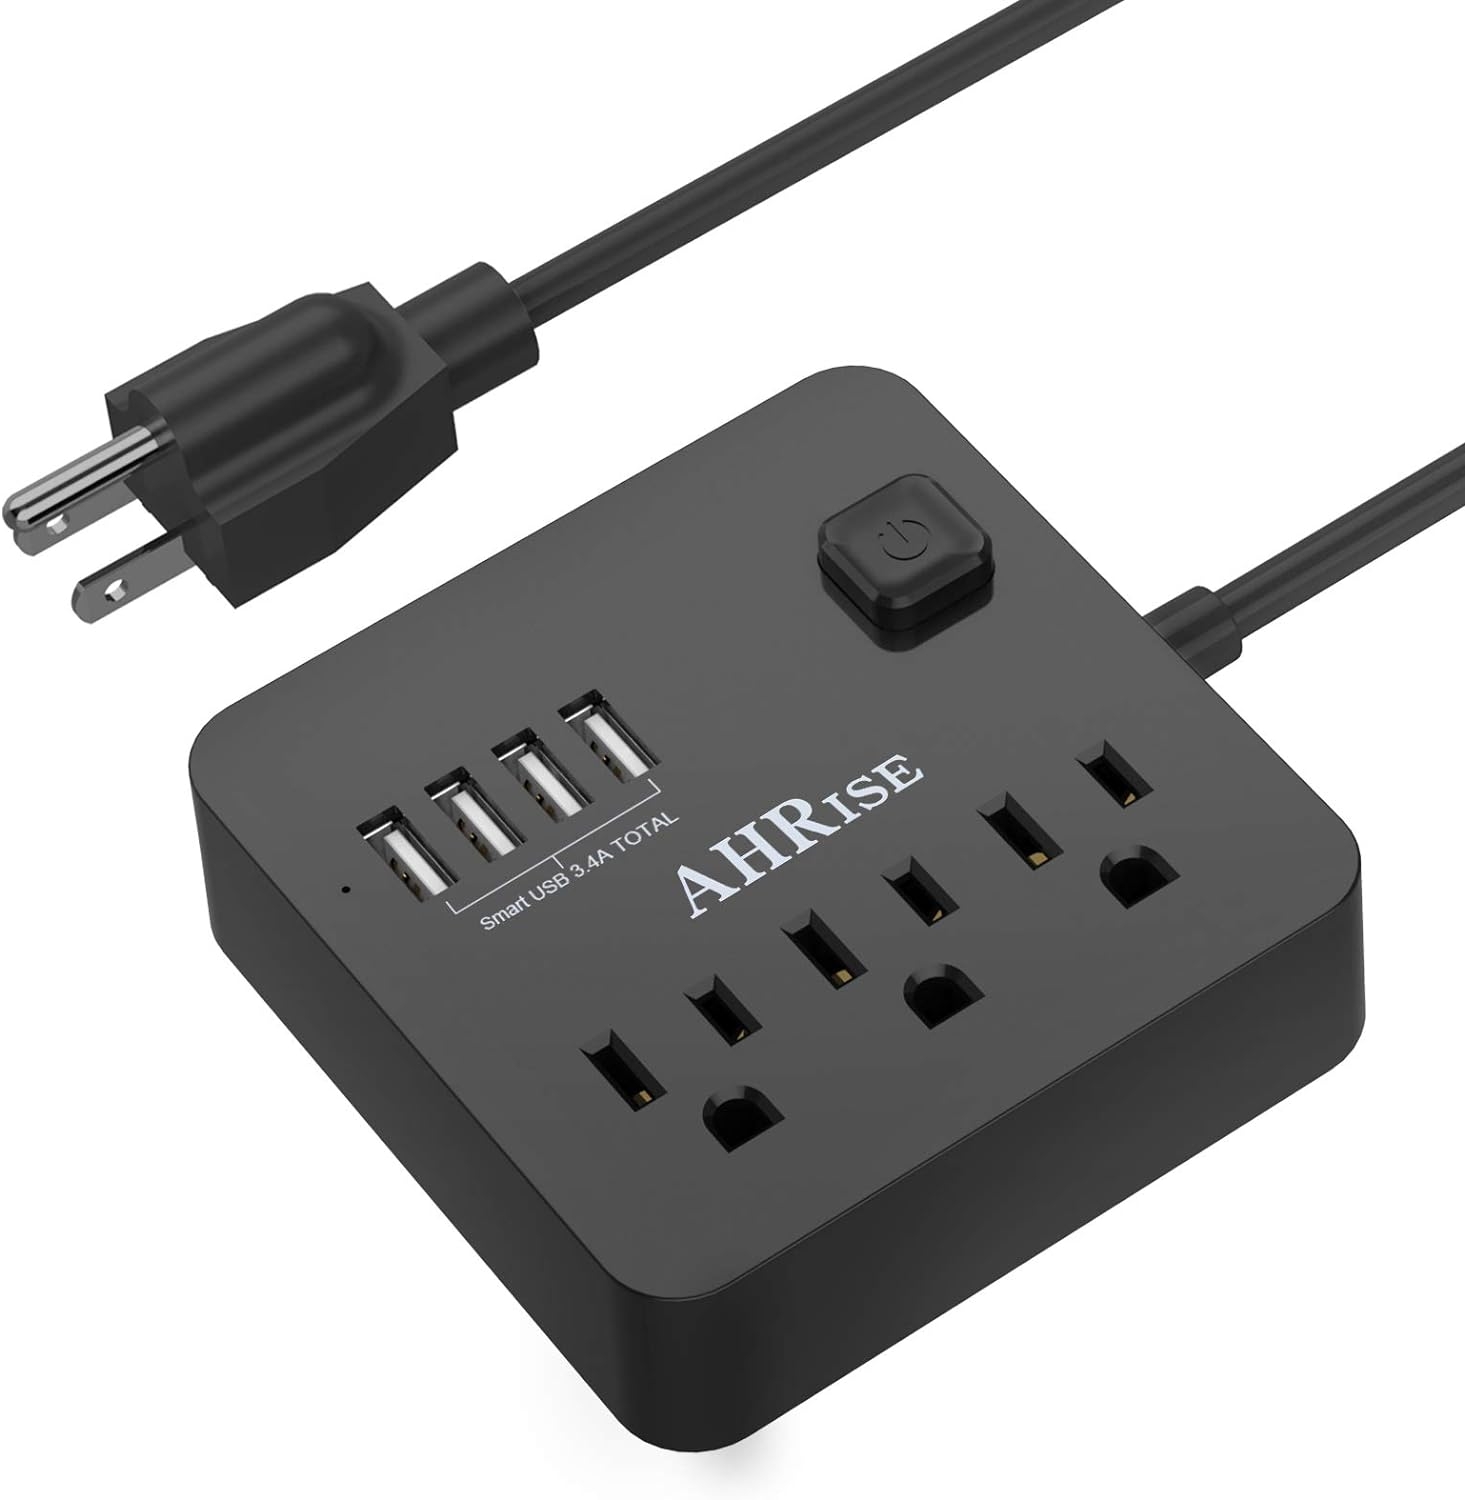 AHRISE Extension Cord, Power Strip with 3 AC Outlets and 4 USB Ports for Smartphone Tablets Home, Office, Hotel, Cruise Ship, 5 Ft, ETL Listed, Black…